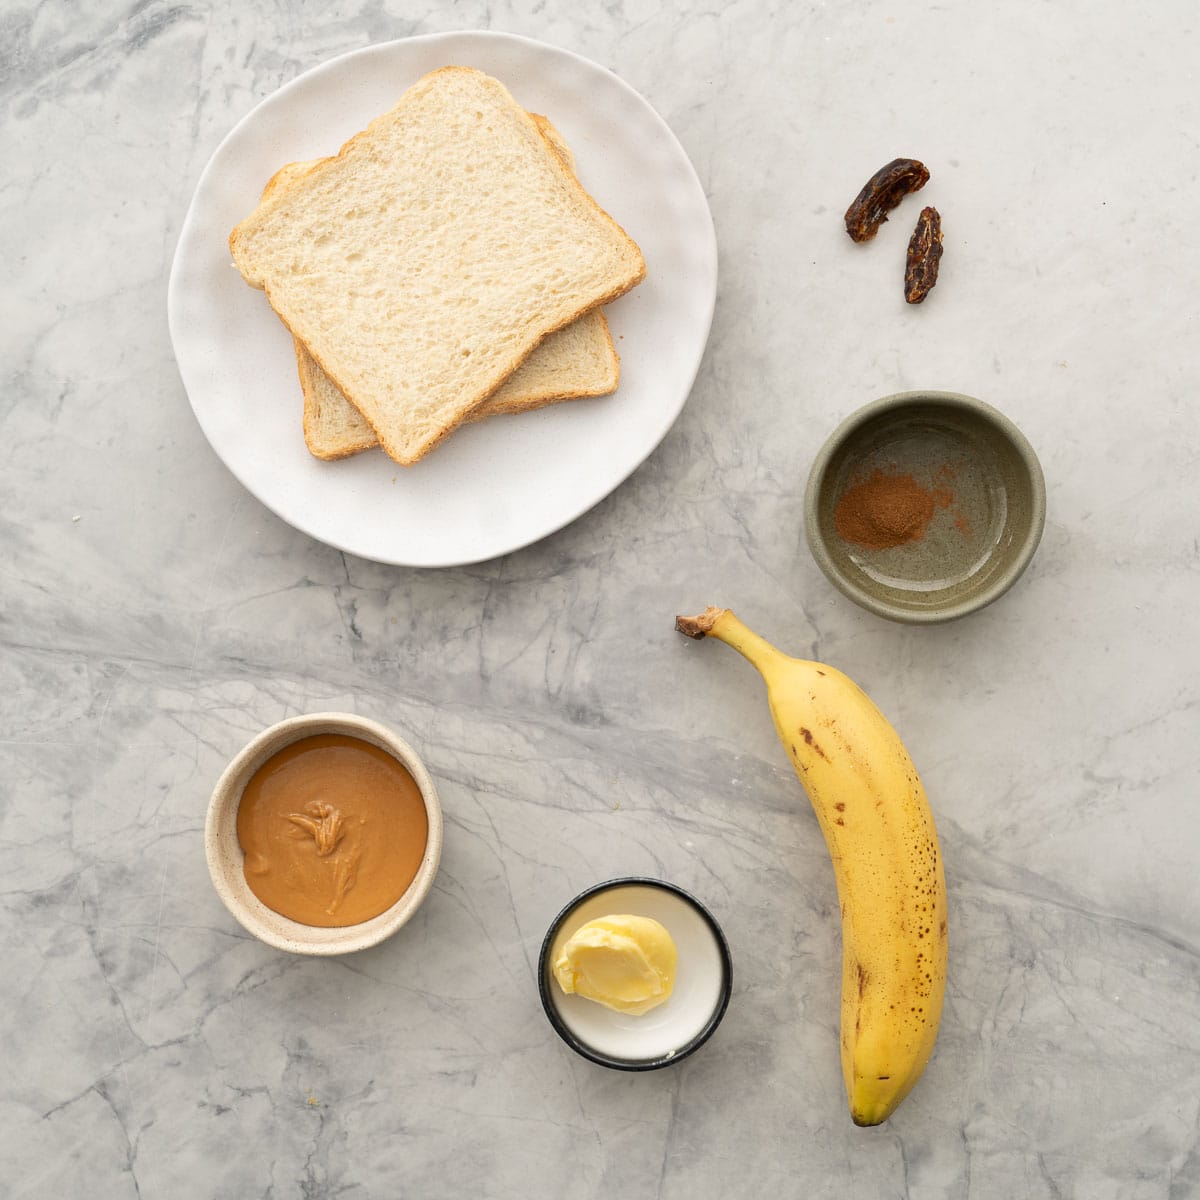 All the ingredients laid out on the bench to make the peanut butter banana sandwich